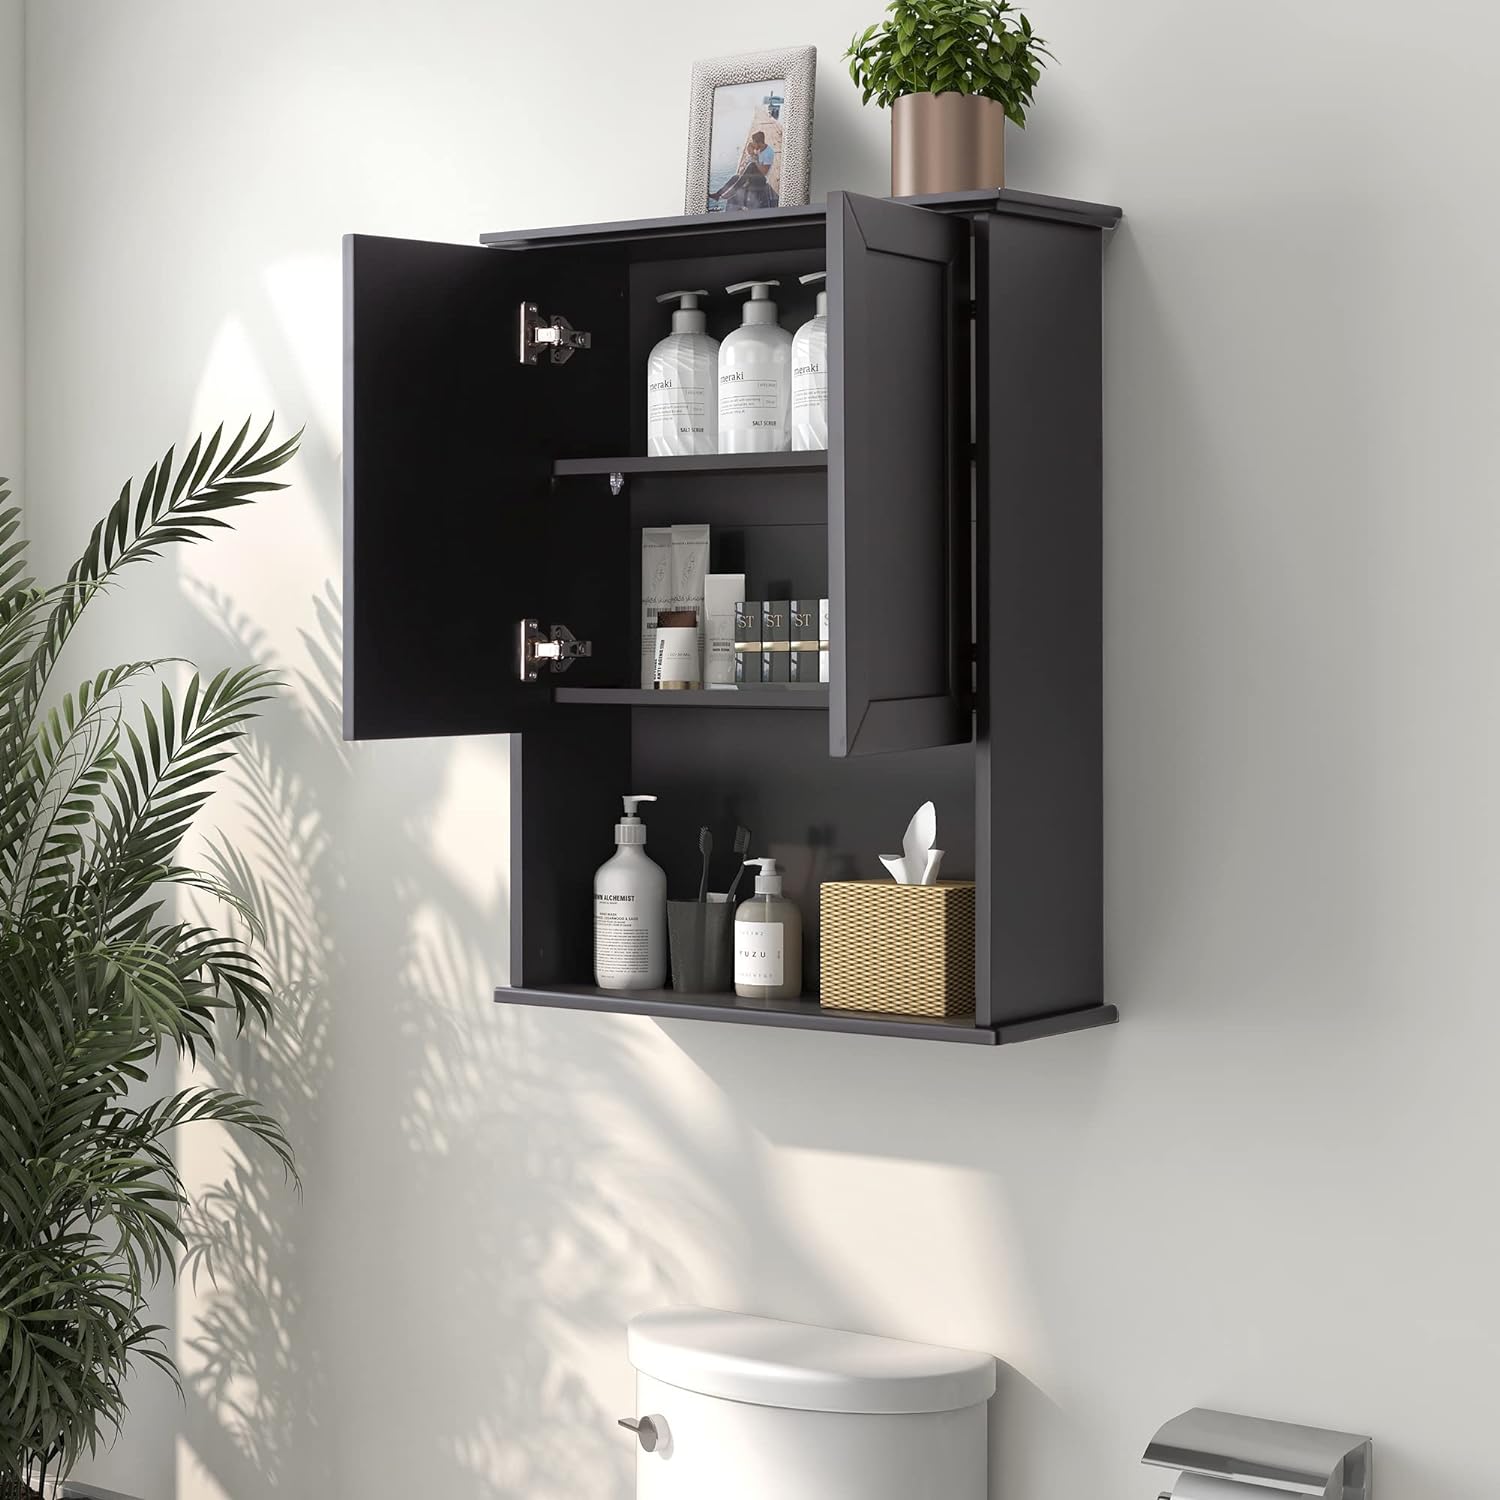 Bathroom Wall Cabinet Black Wall Mounted Wood Medicine Cabinets, Over Toilet Storage Cabinet with 2 Doors